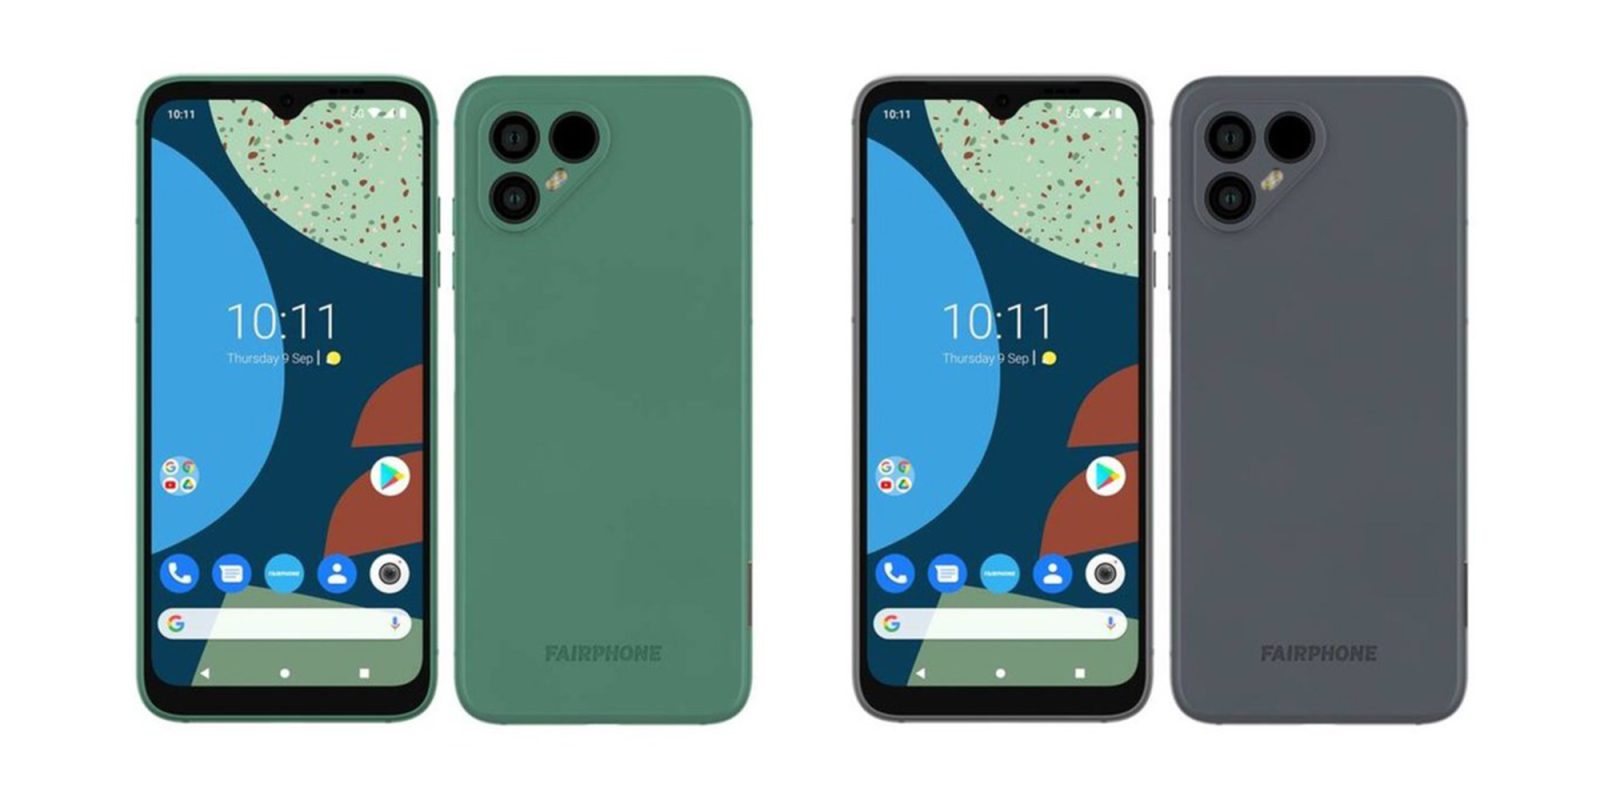 Fairphone 4 renders in green and gray